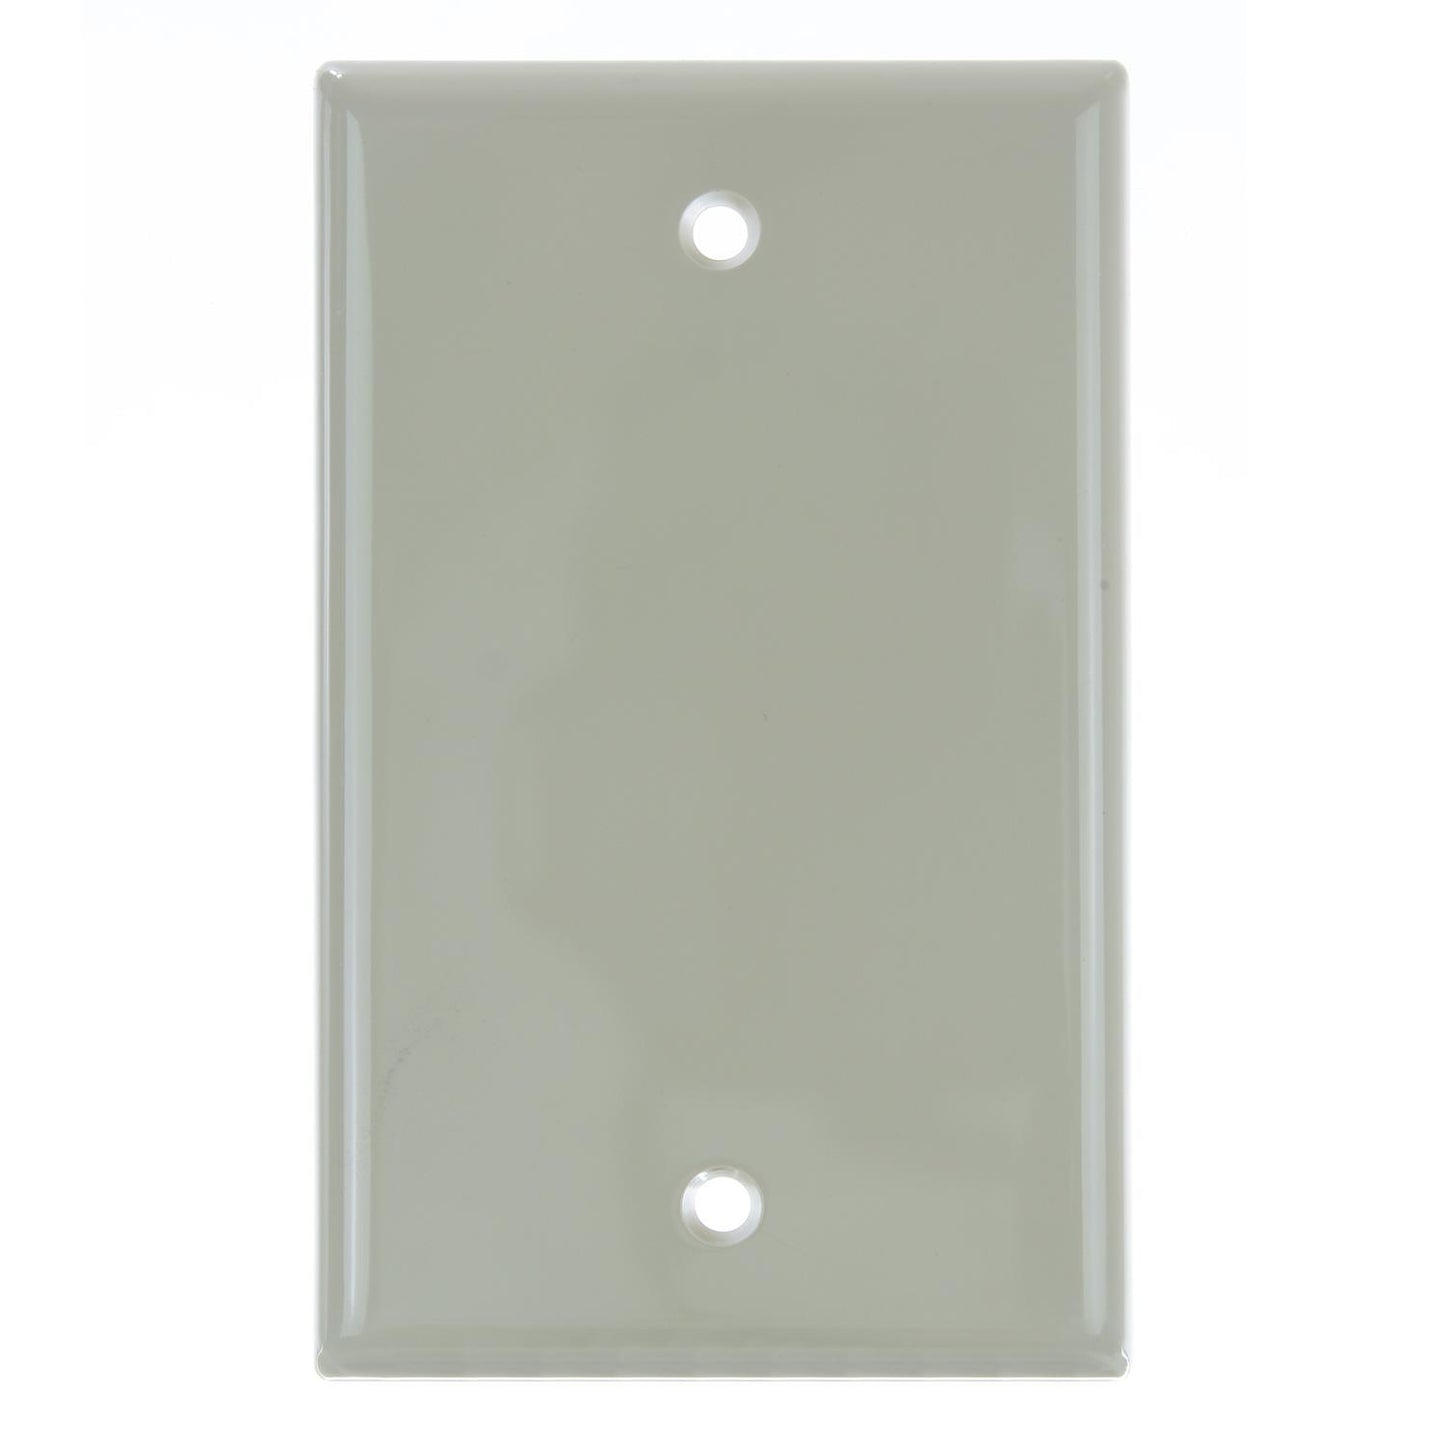 Sunlite E401/I 1 Gang Blank Switch and Receptacle Plate, Ivory